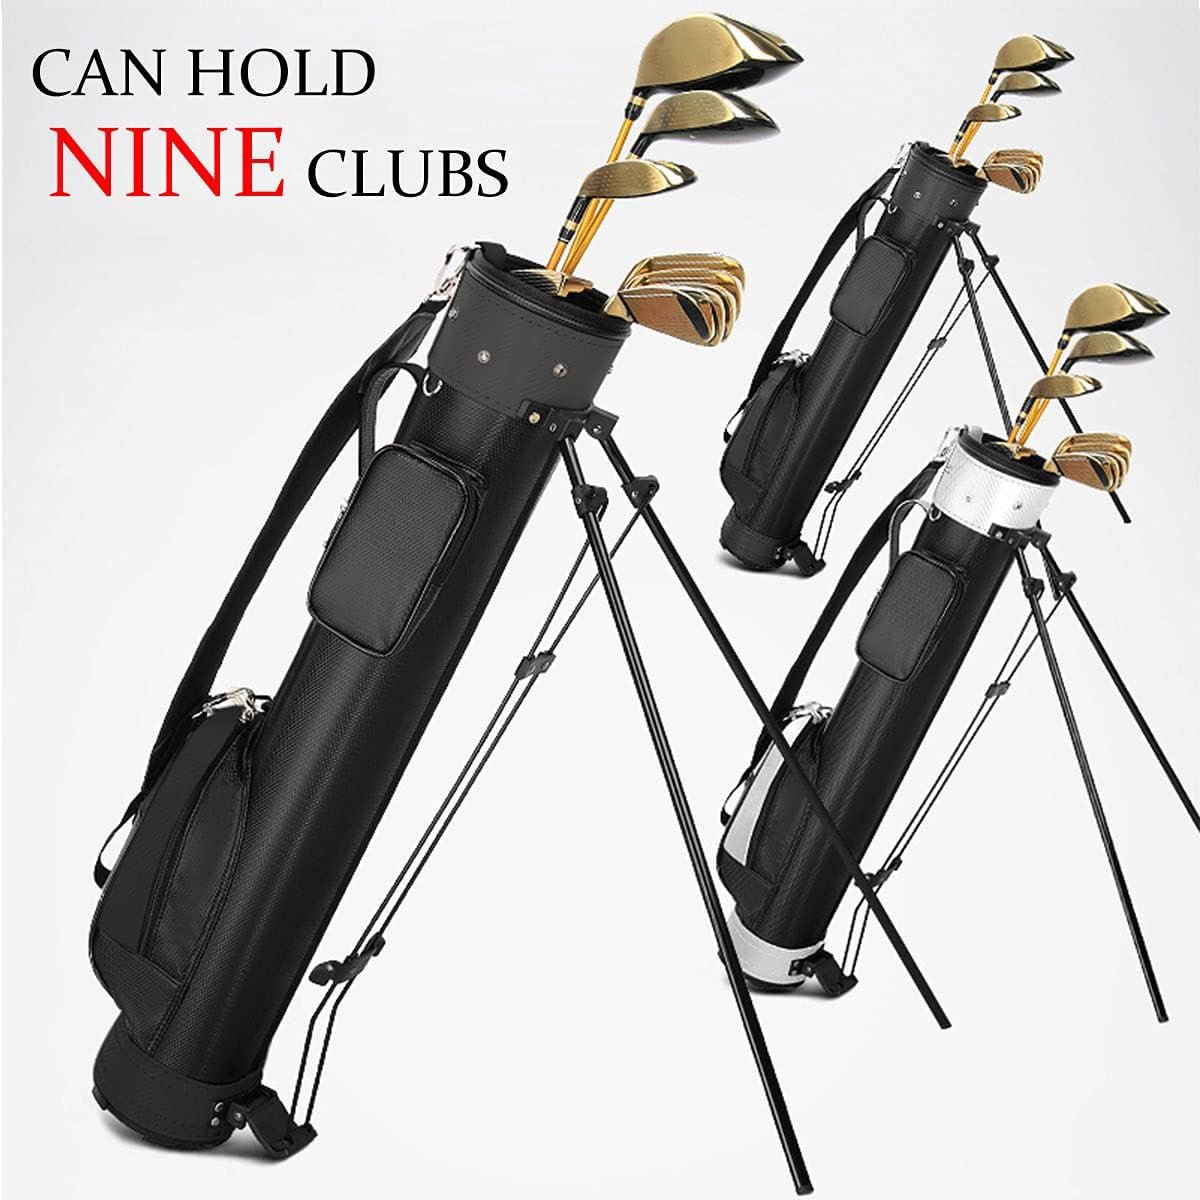 5 Golf Stand Bags Compared